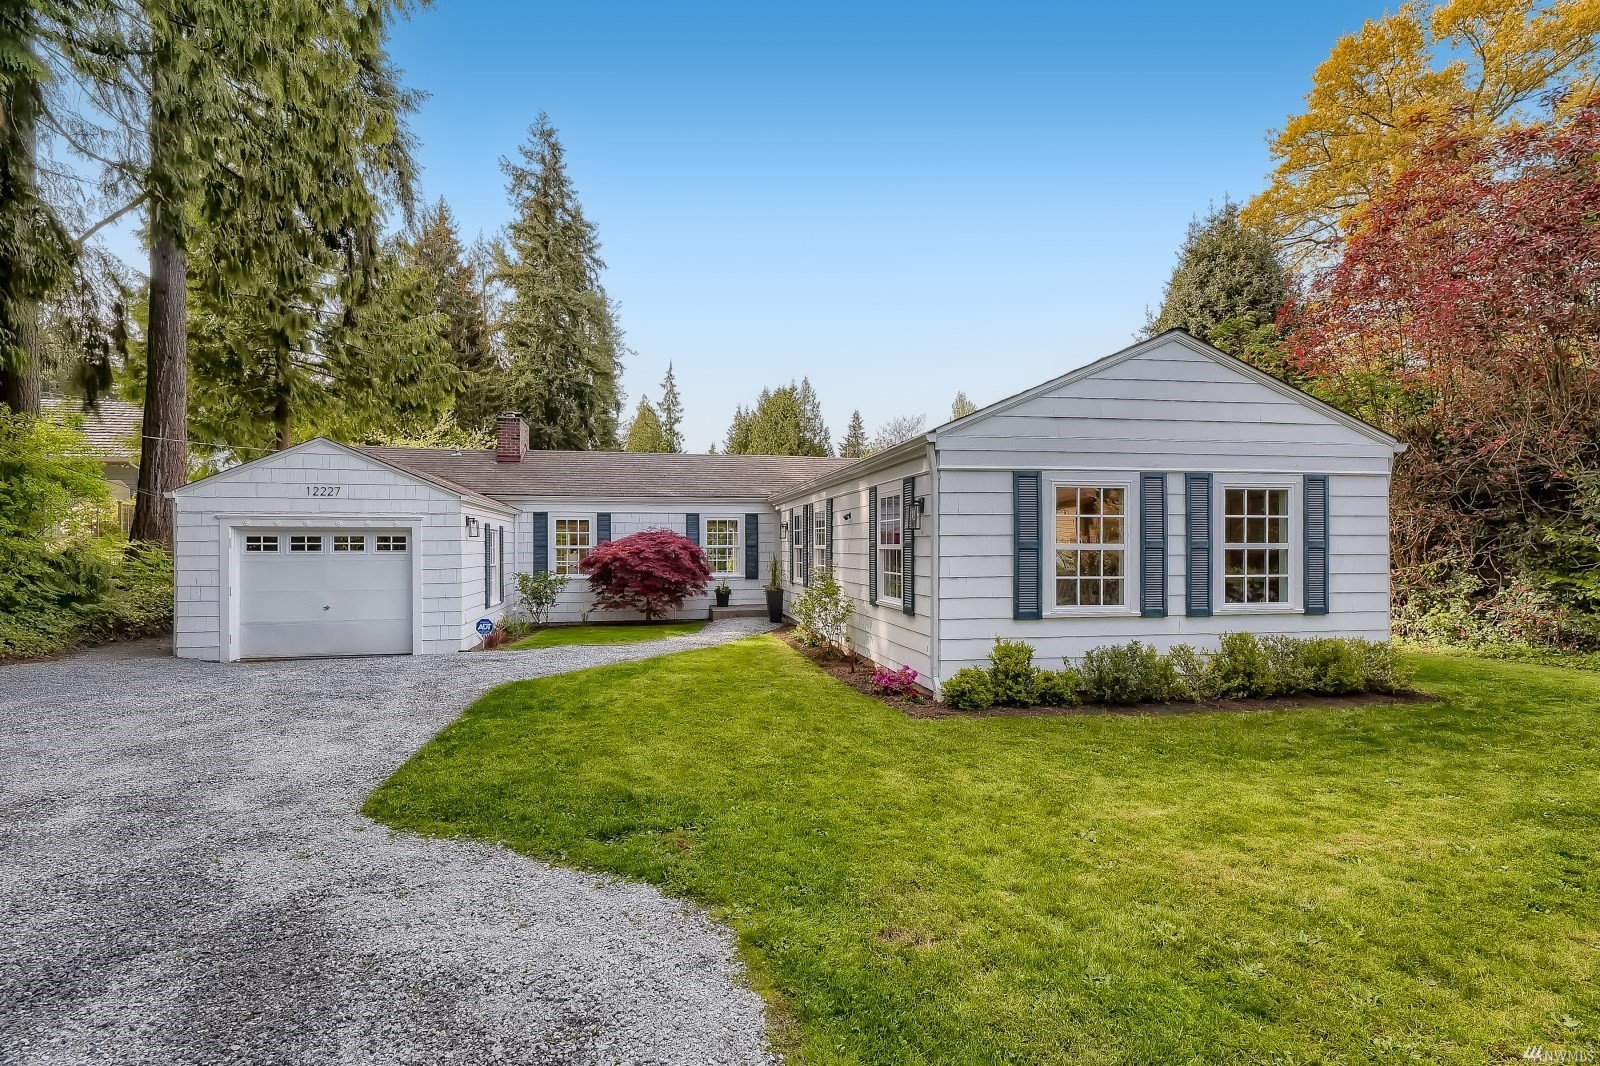 12227 CORLISS AVENUE N, SEATTLE | SOLD AT $1,075,000